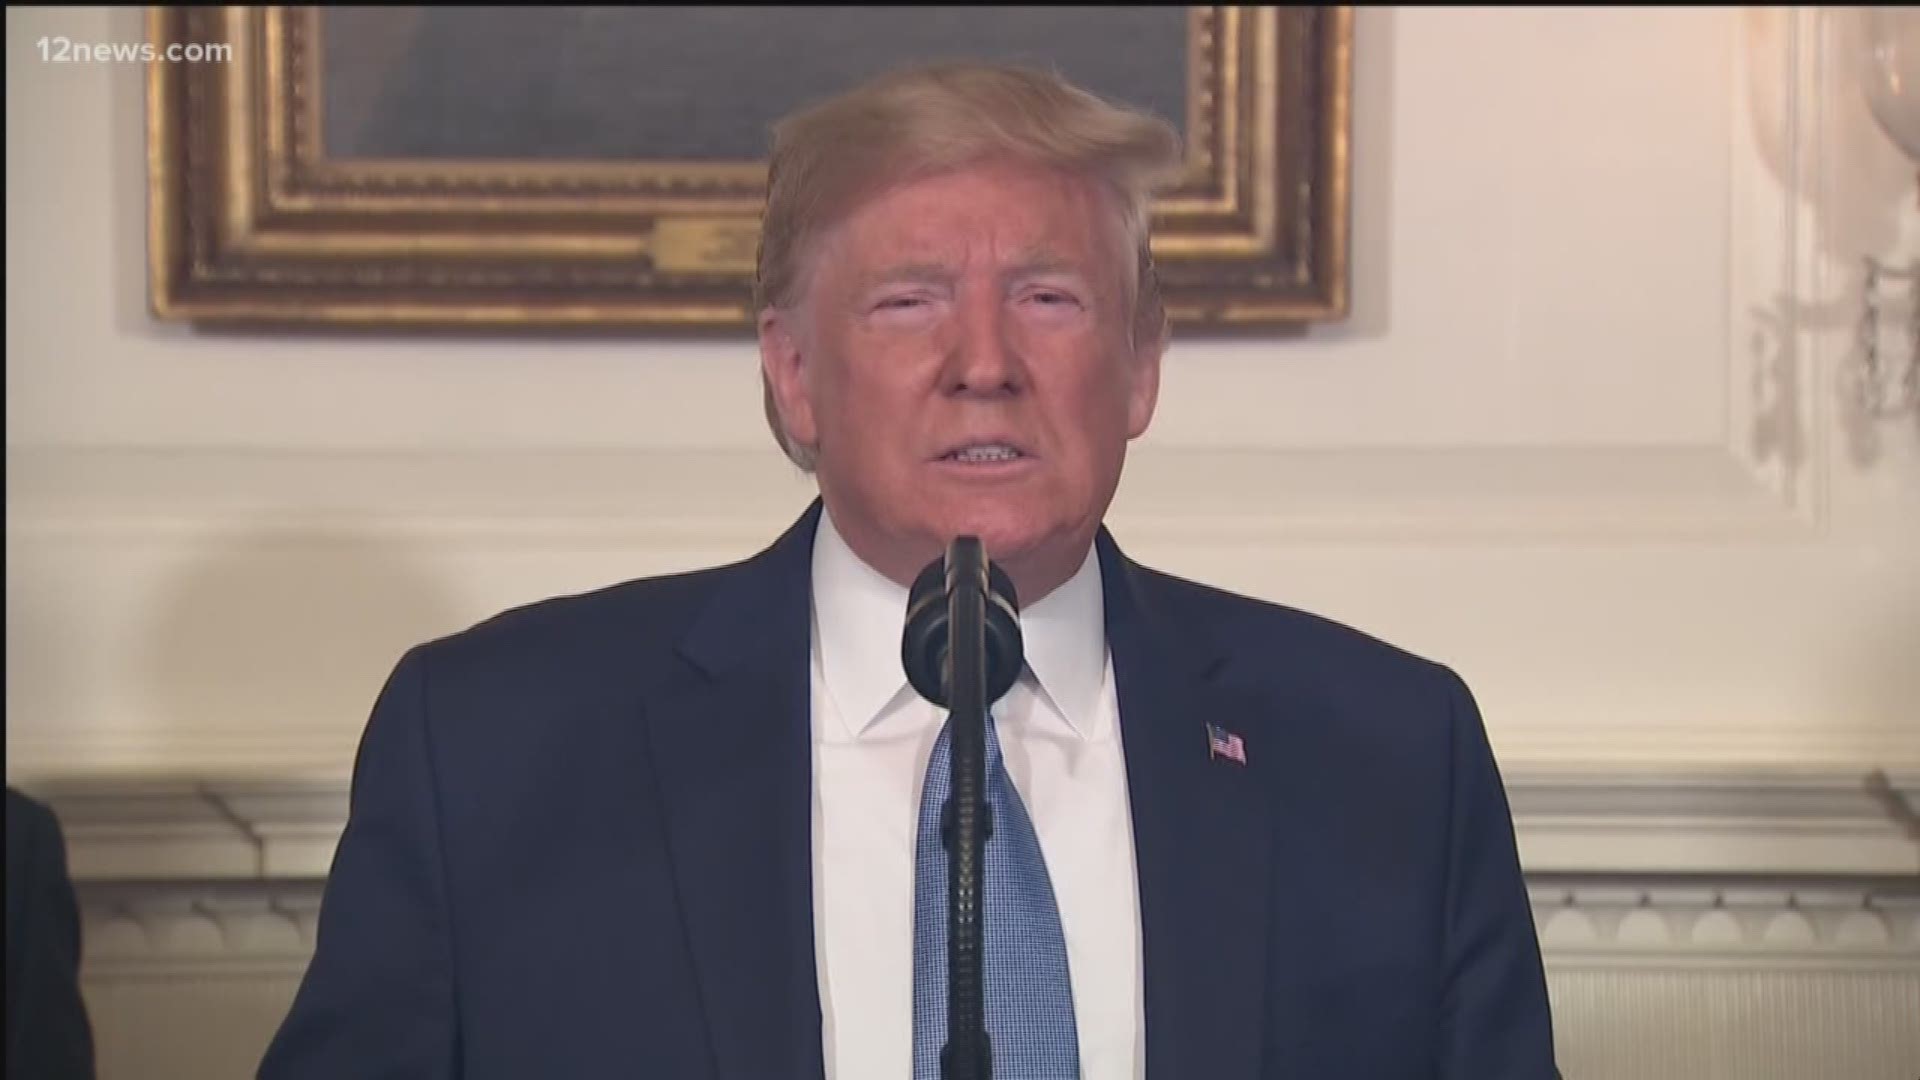 In an address to the nation Monday morning, President Trump laid out a four-point plan to help stop gun violence. He also called on everyone to condemn racism. Solutions included paying more attention to warning signs and taking away guns in certain situations.